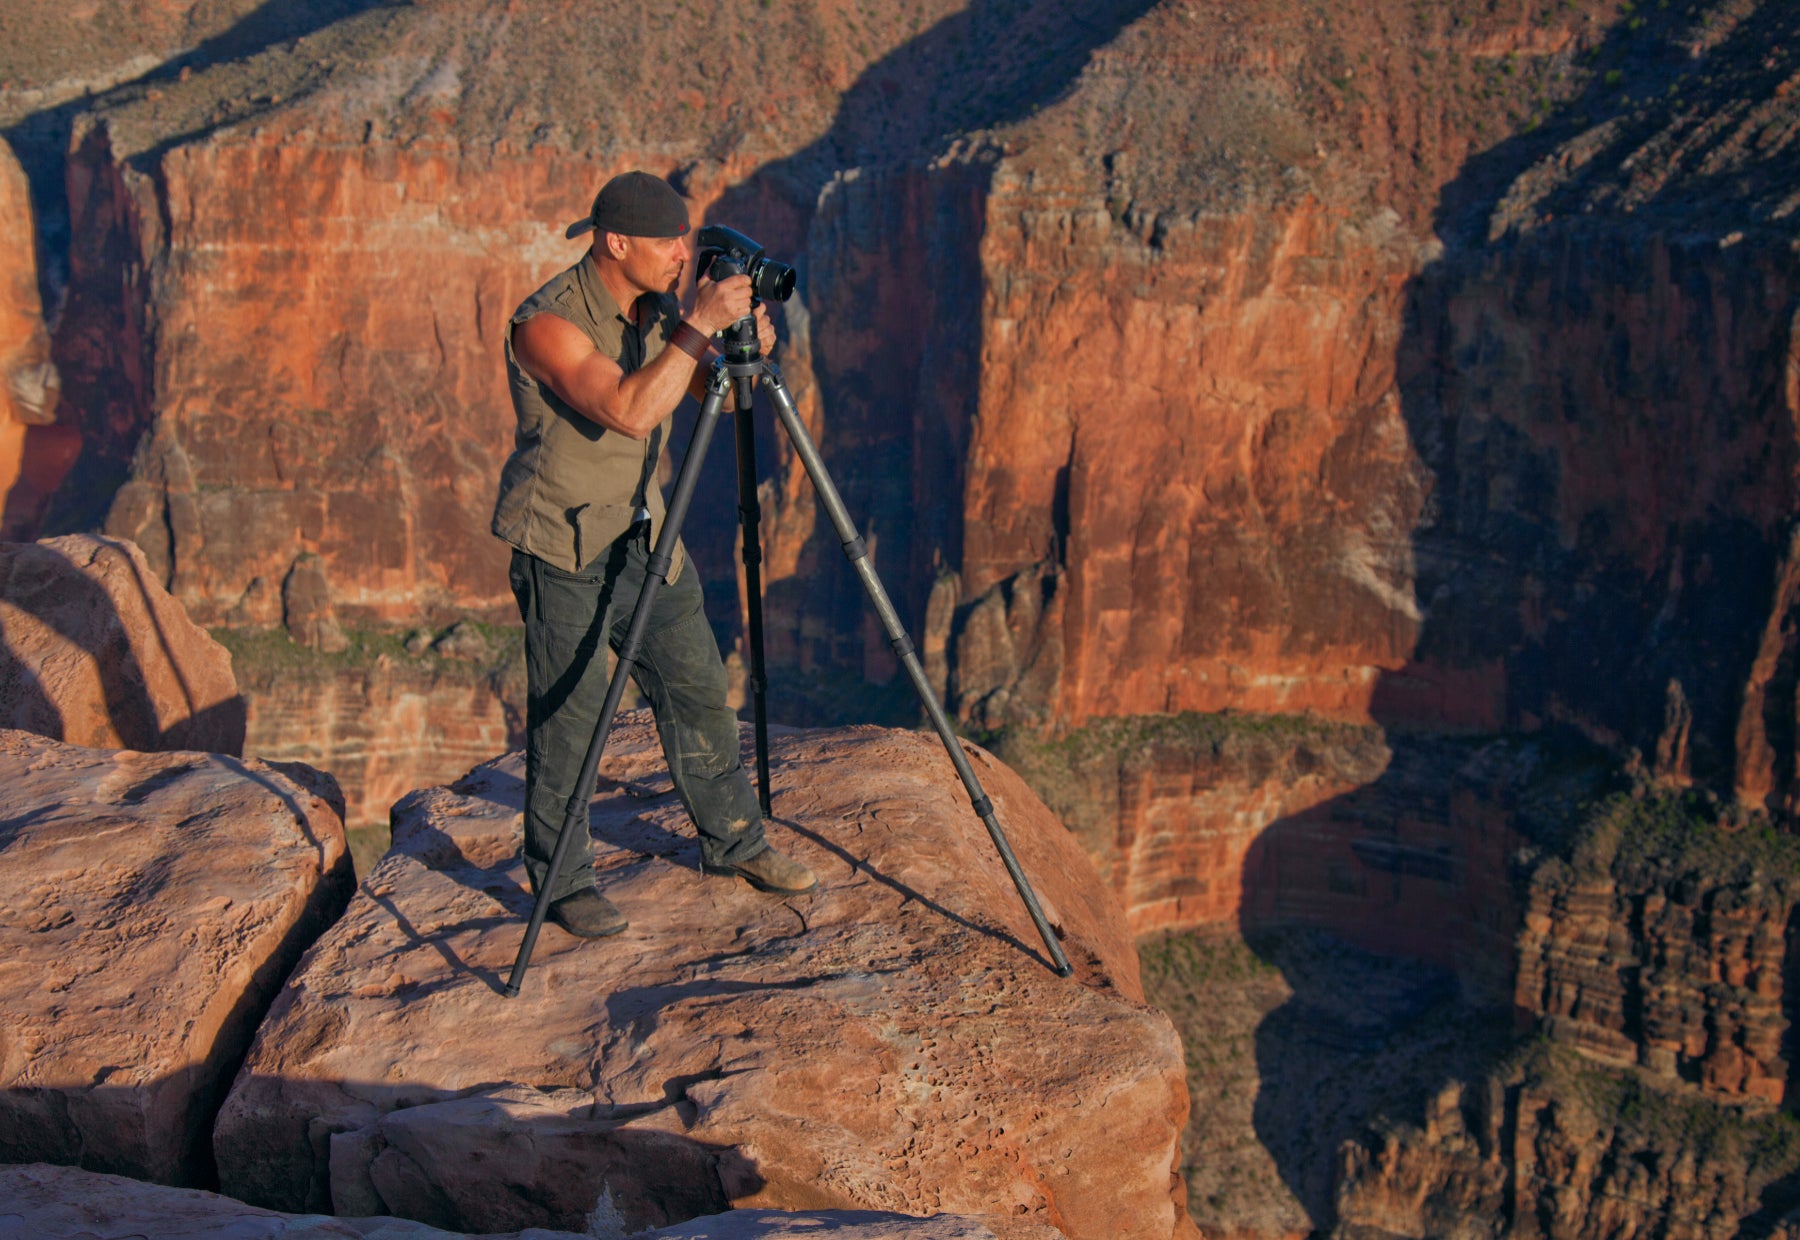 Portrait of Peter Lik in a baseball cap and a shirt with no sleeves taking a picture at the Grand Canyon National Park in Arizona.